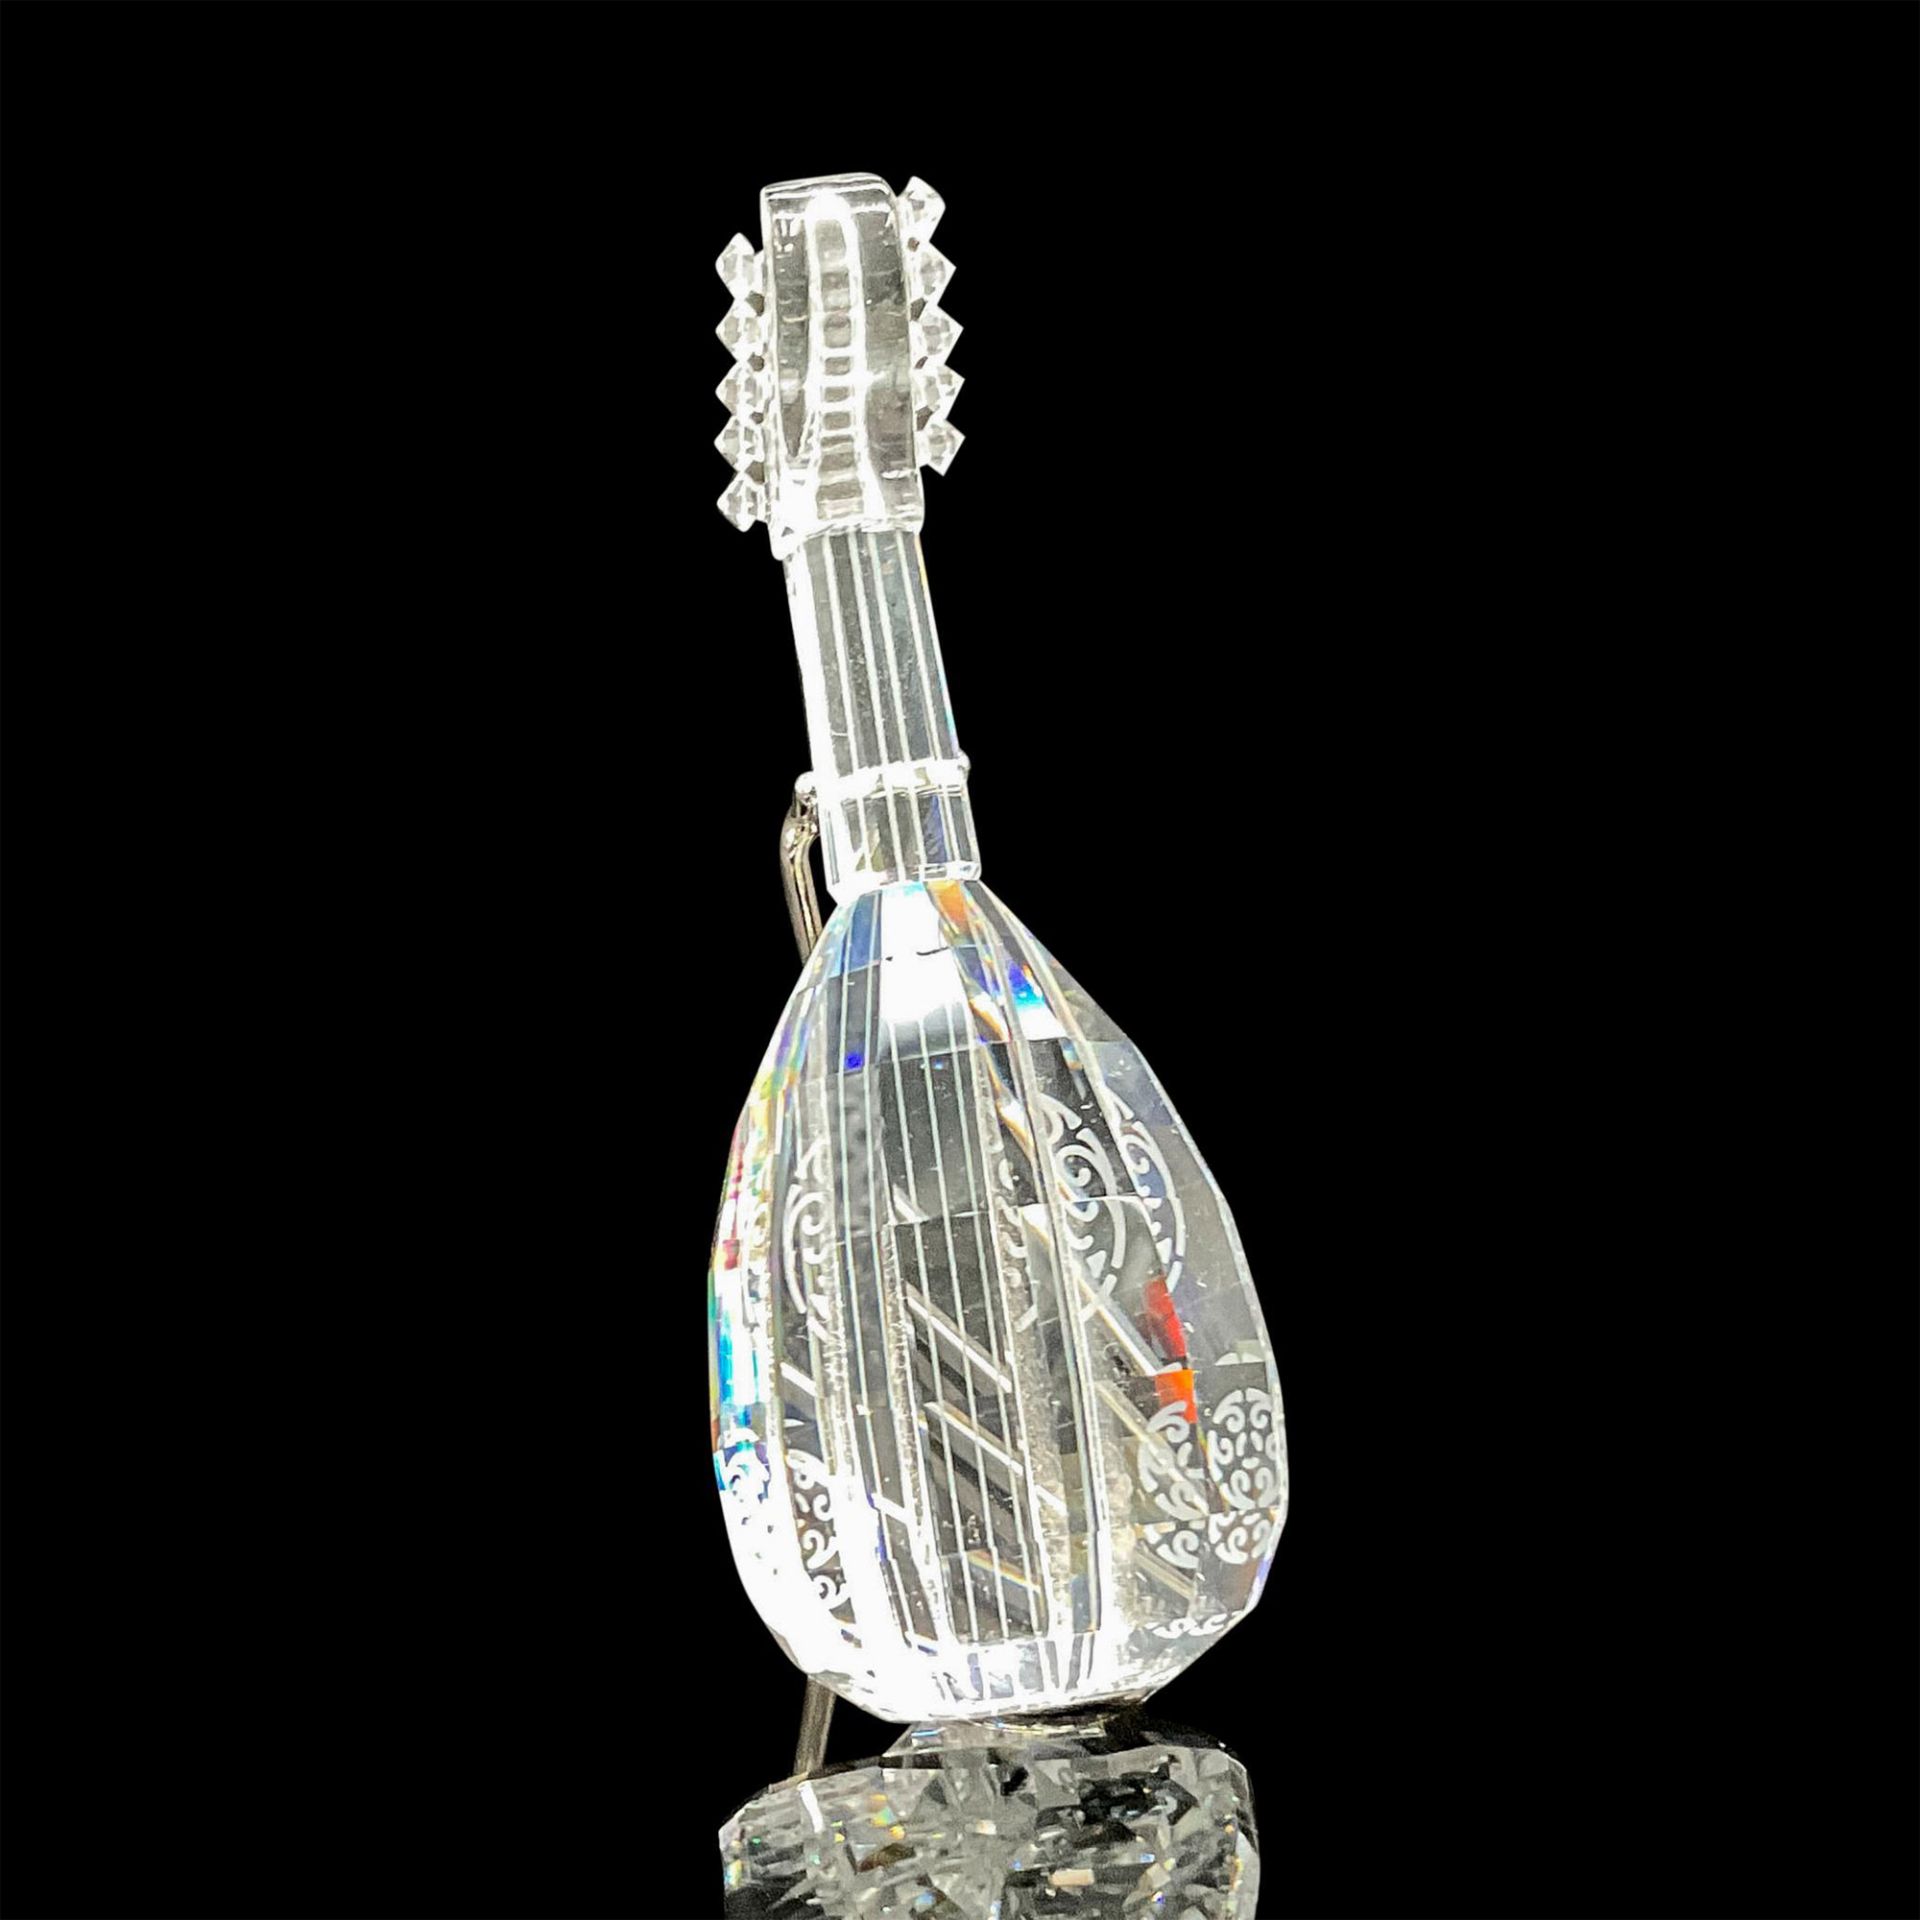 Swarovski Silver Crystal Figurine, Lute with Stand - Image 2 of 4